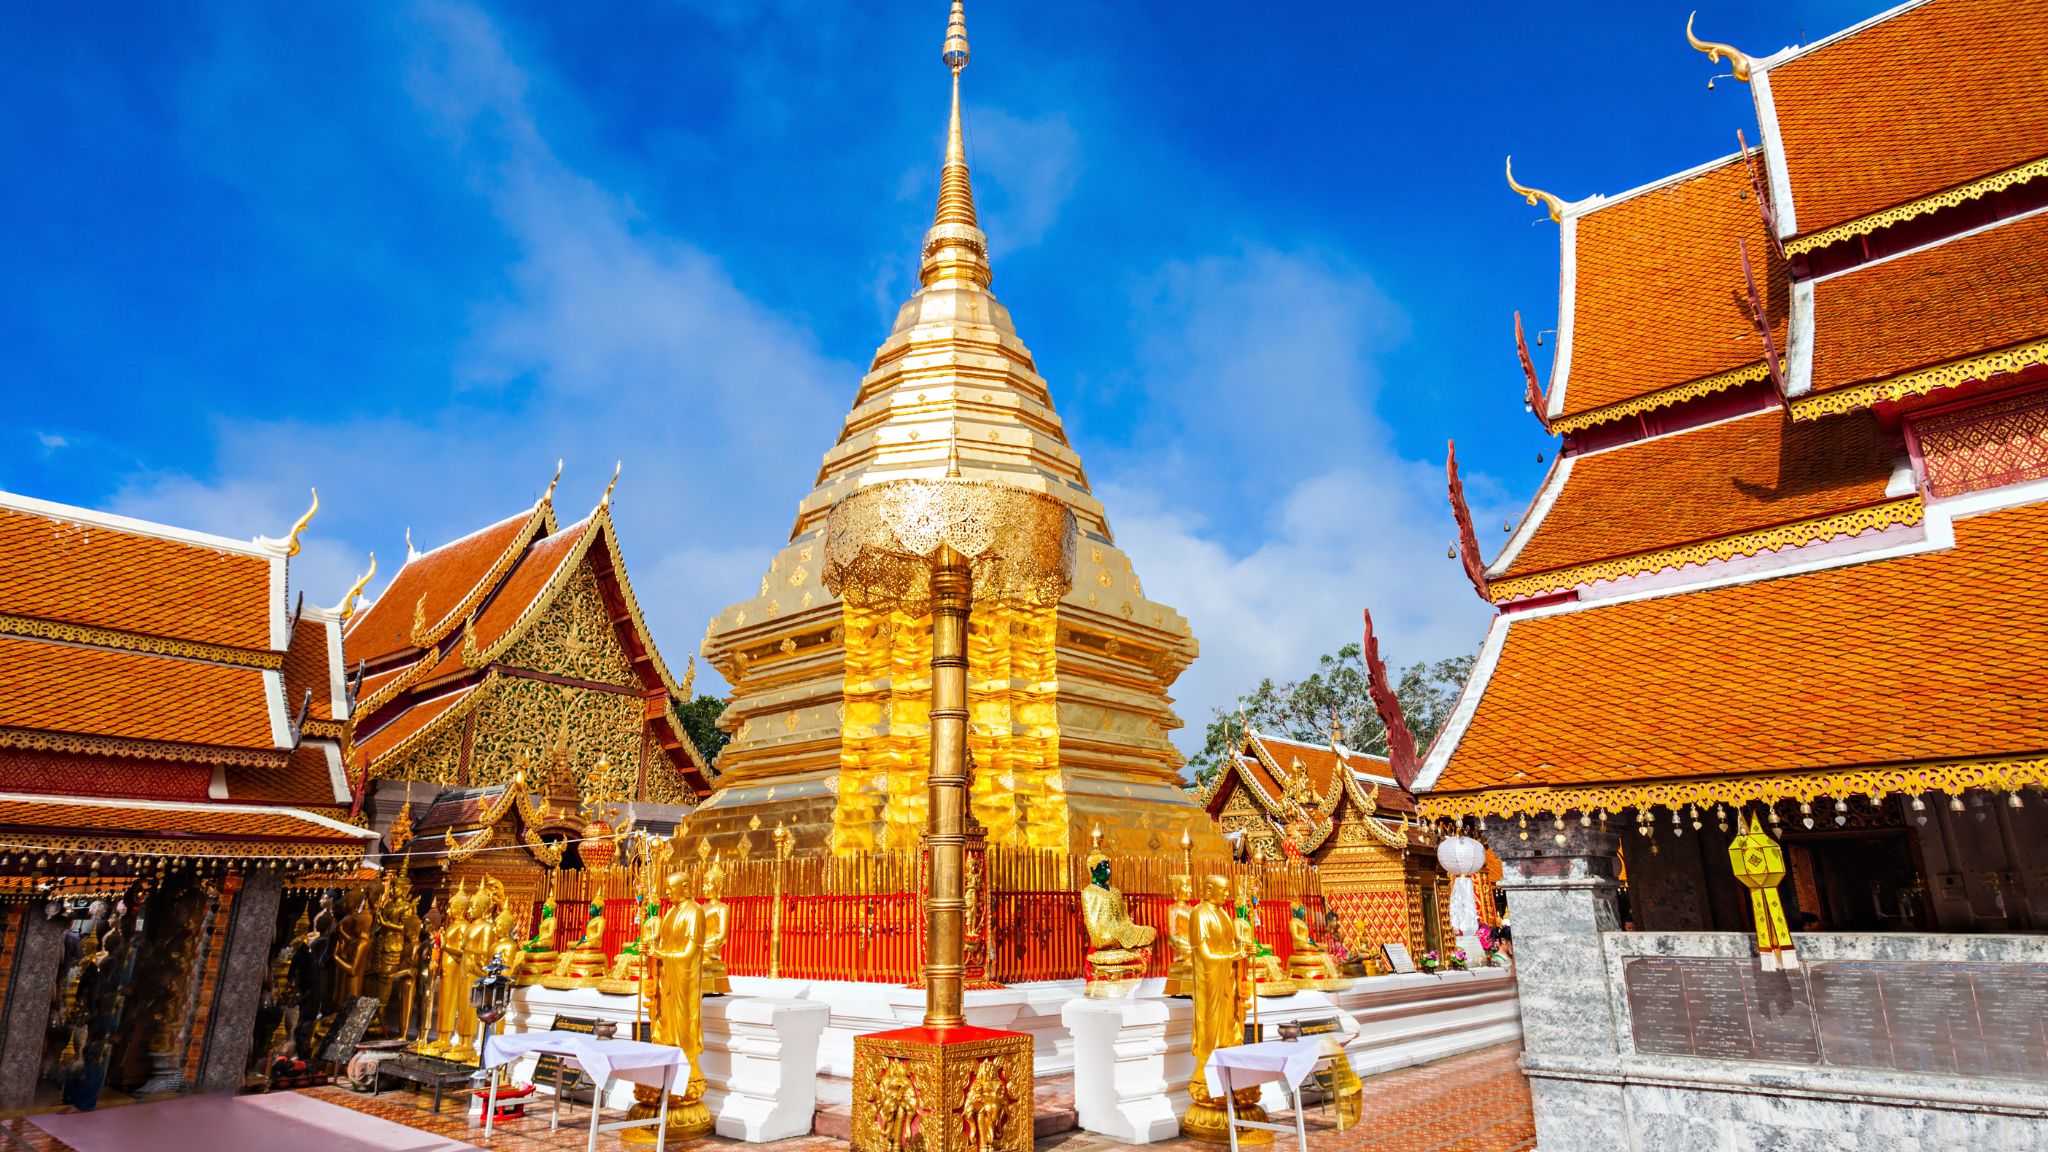 Day 6 Wat Phra That Doi Suthep One Of The Most Beautiful Temples In Thailand